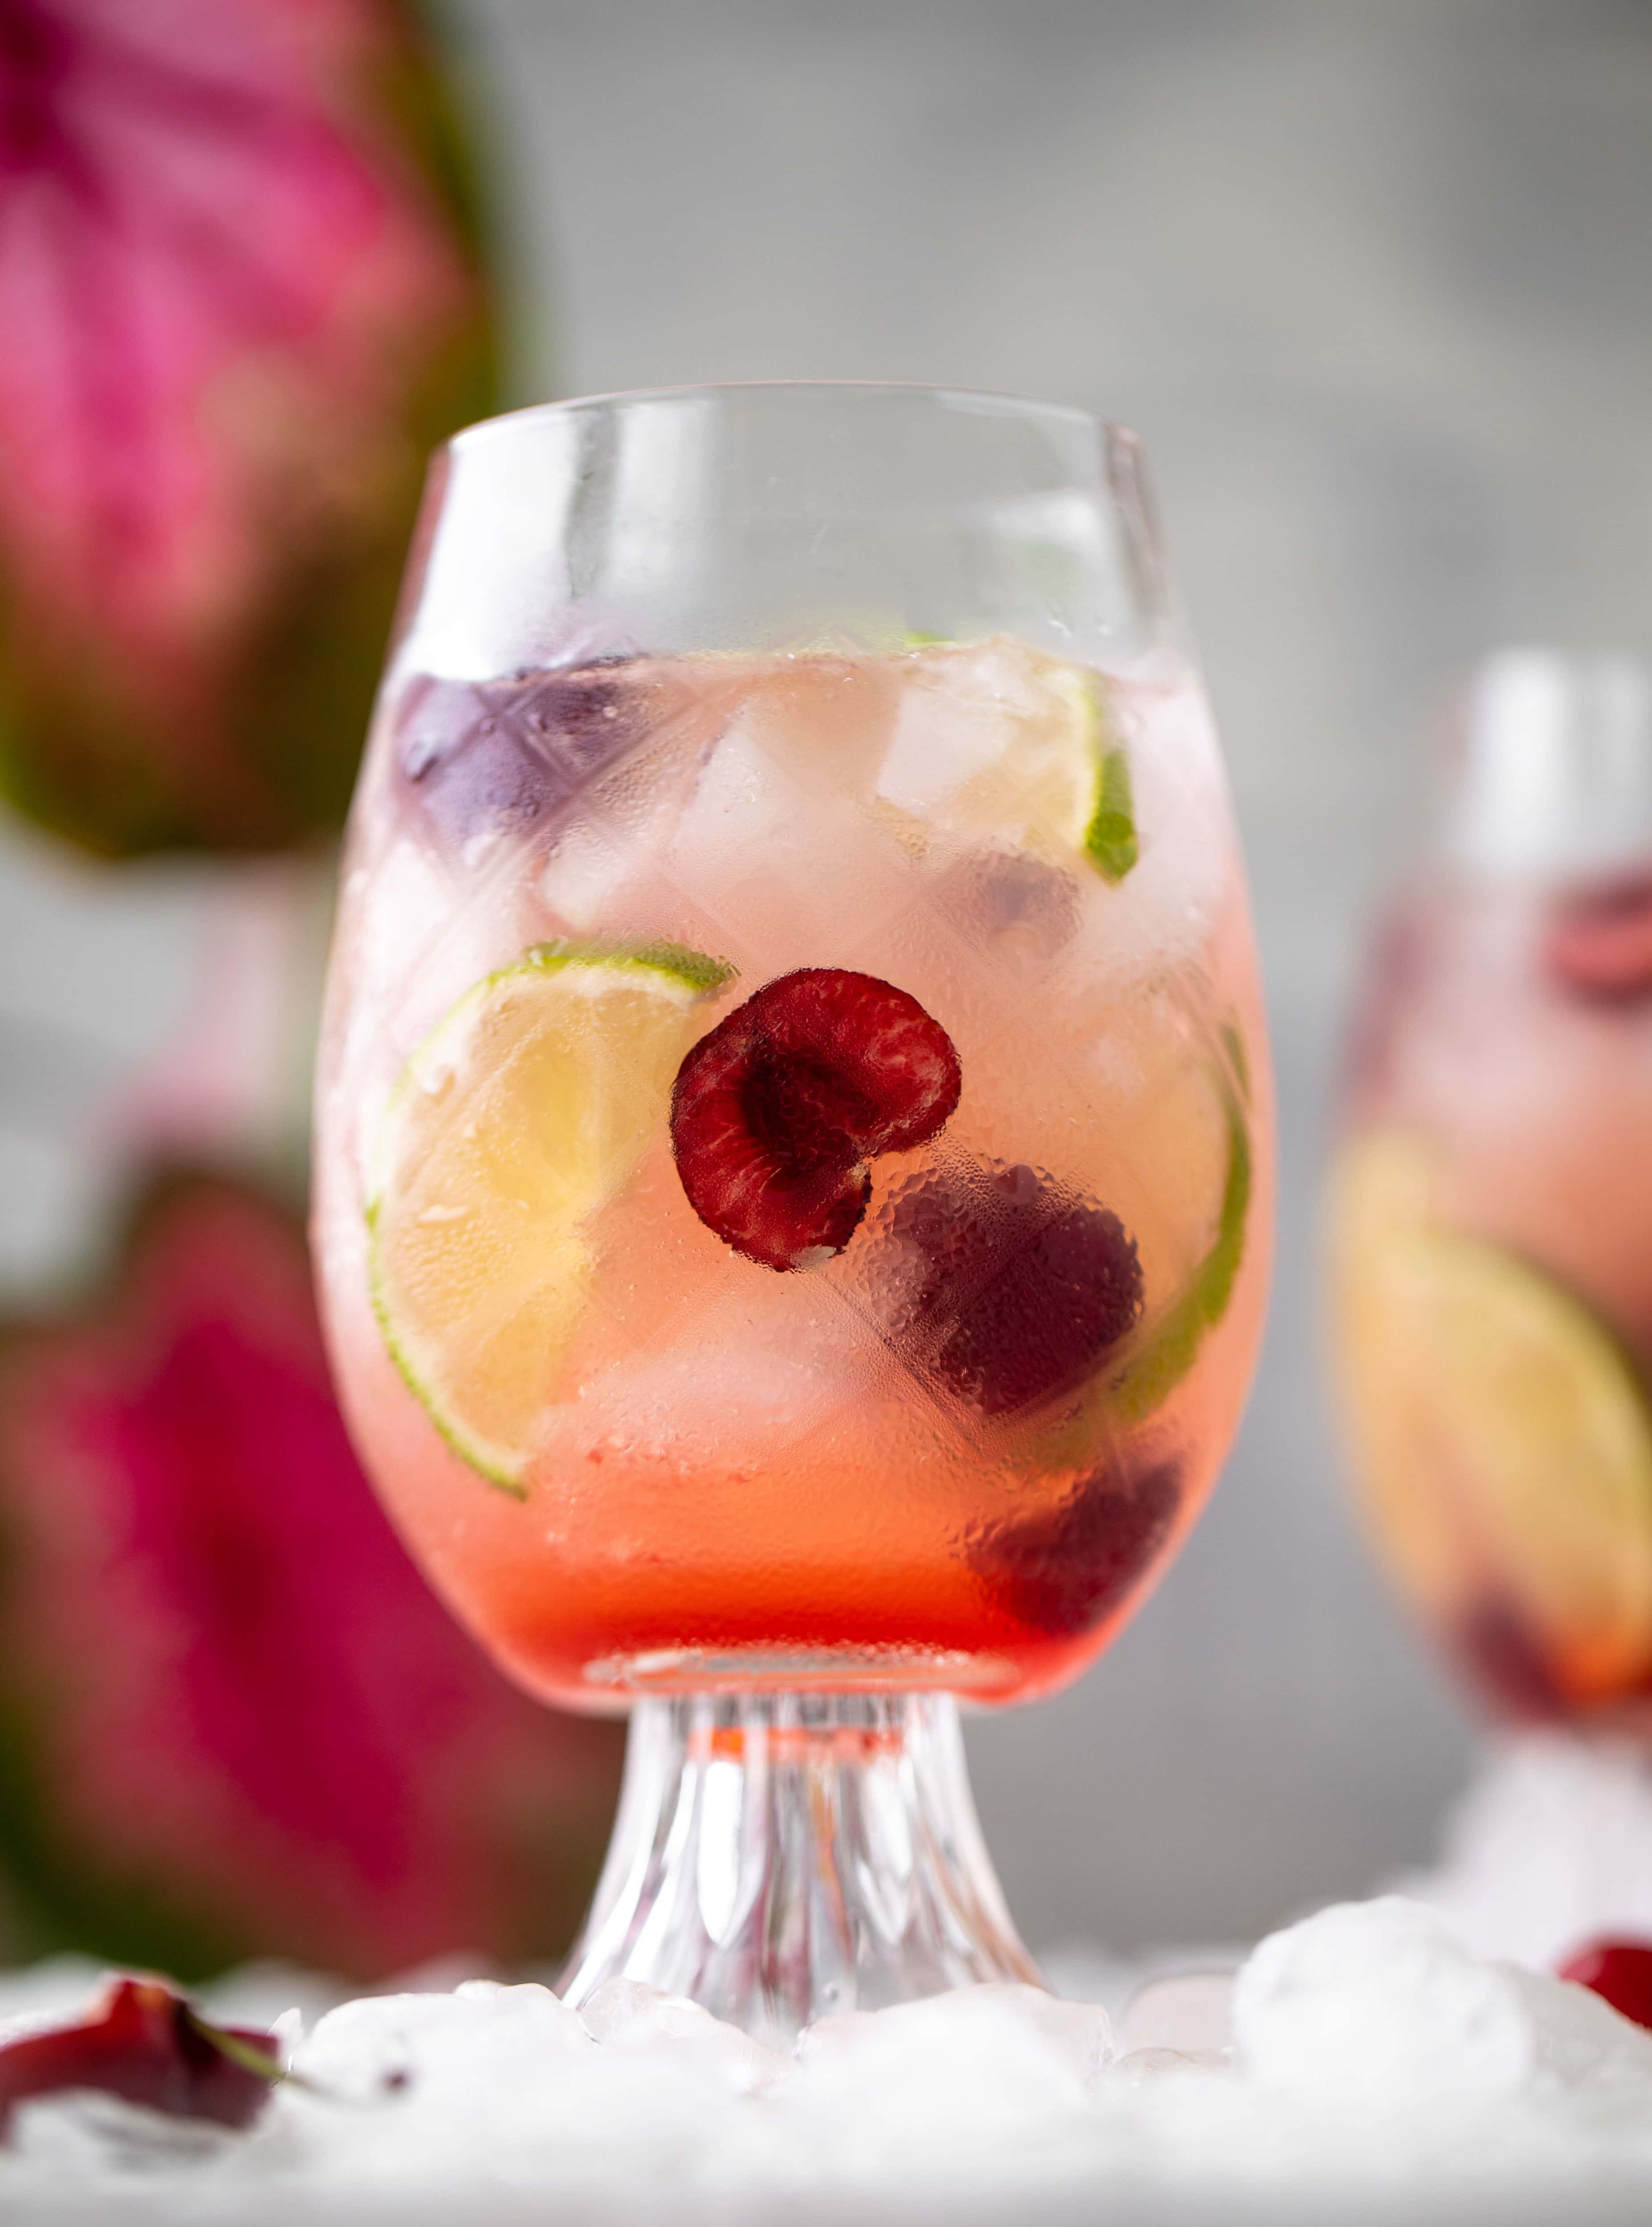 http://www.howsweeteats.com/wp-content/uploads/2020/05/cherry-gin-and-tonic-10.jpg